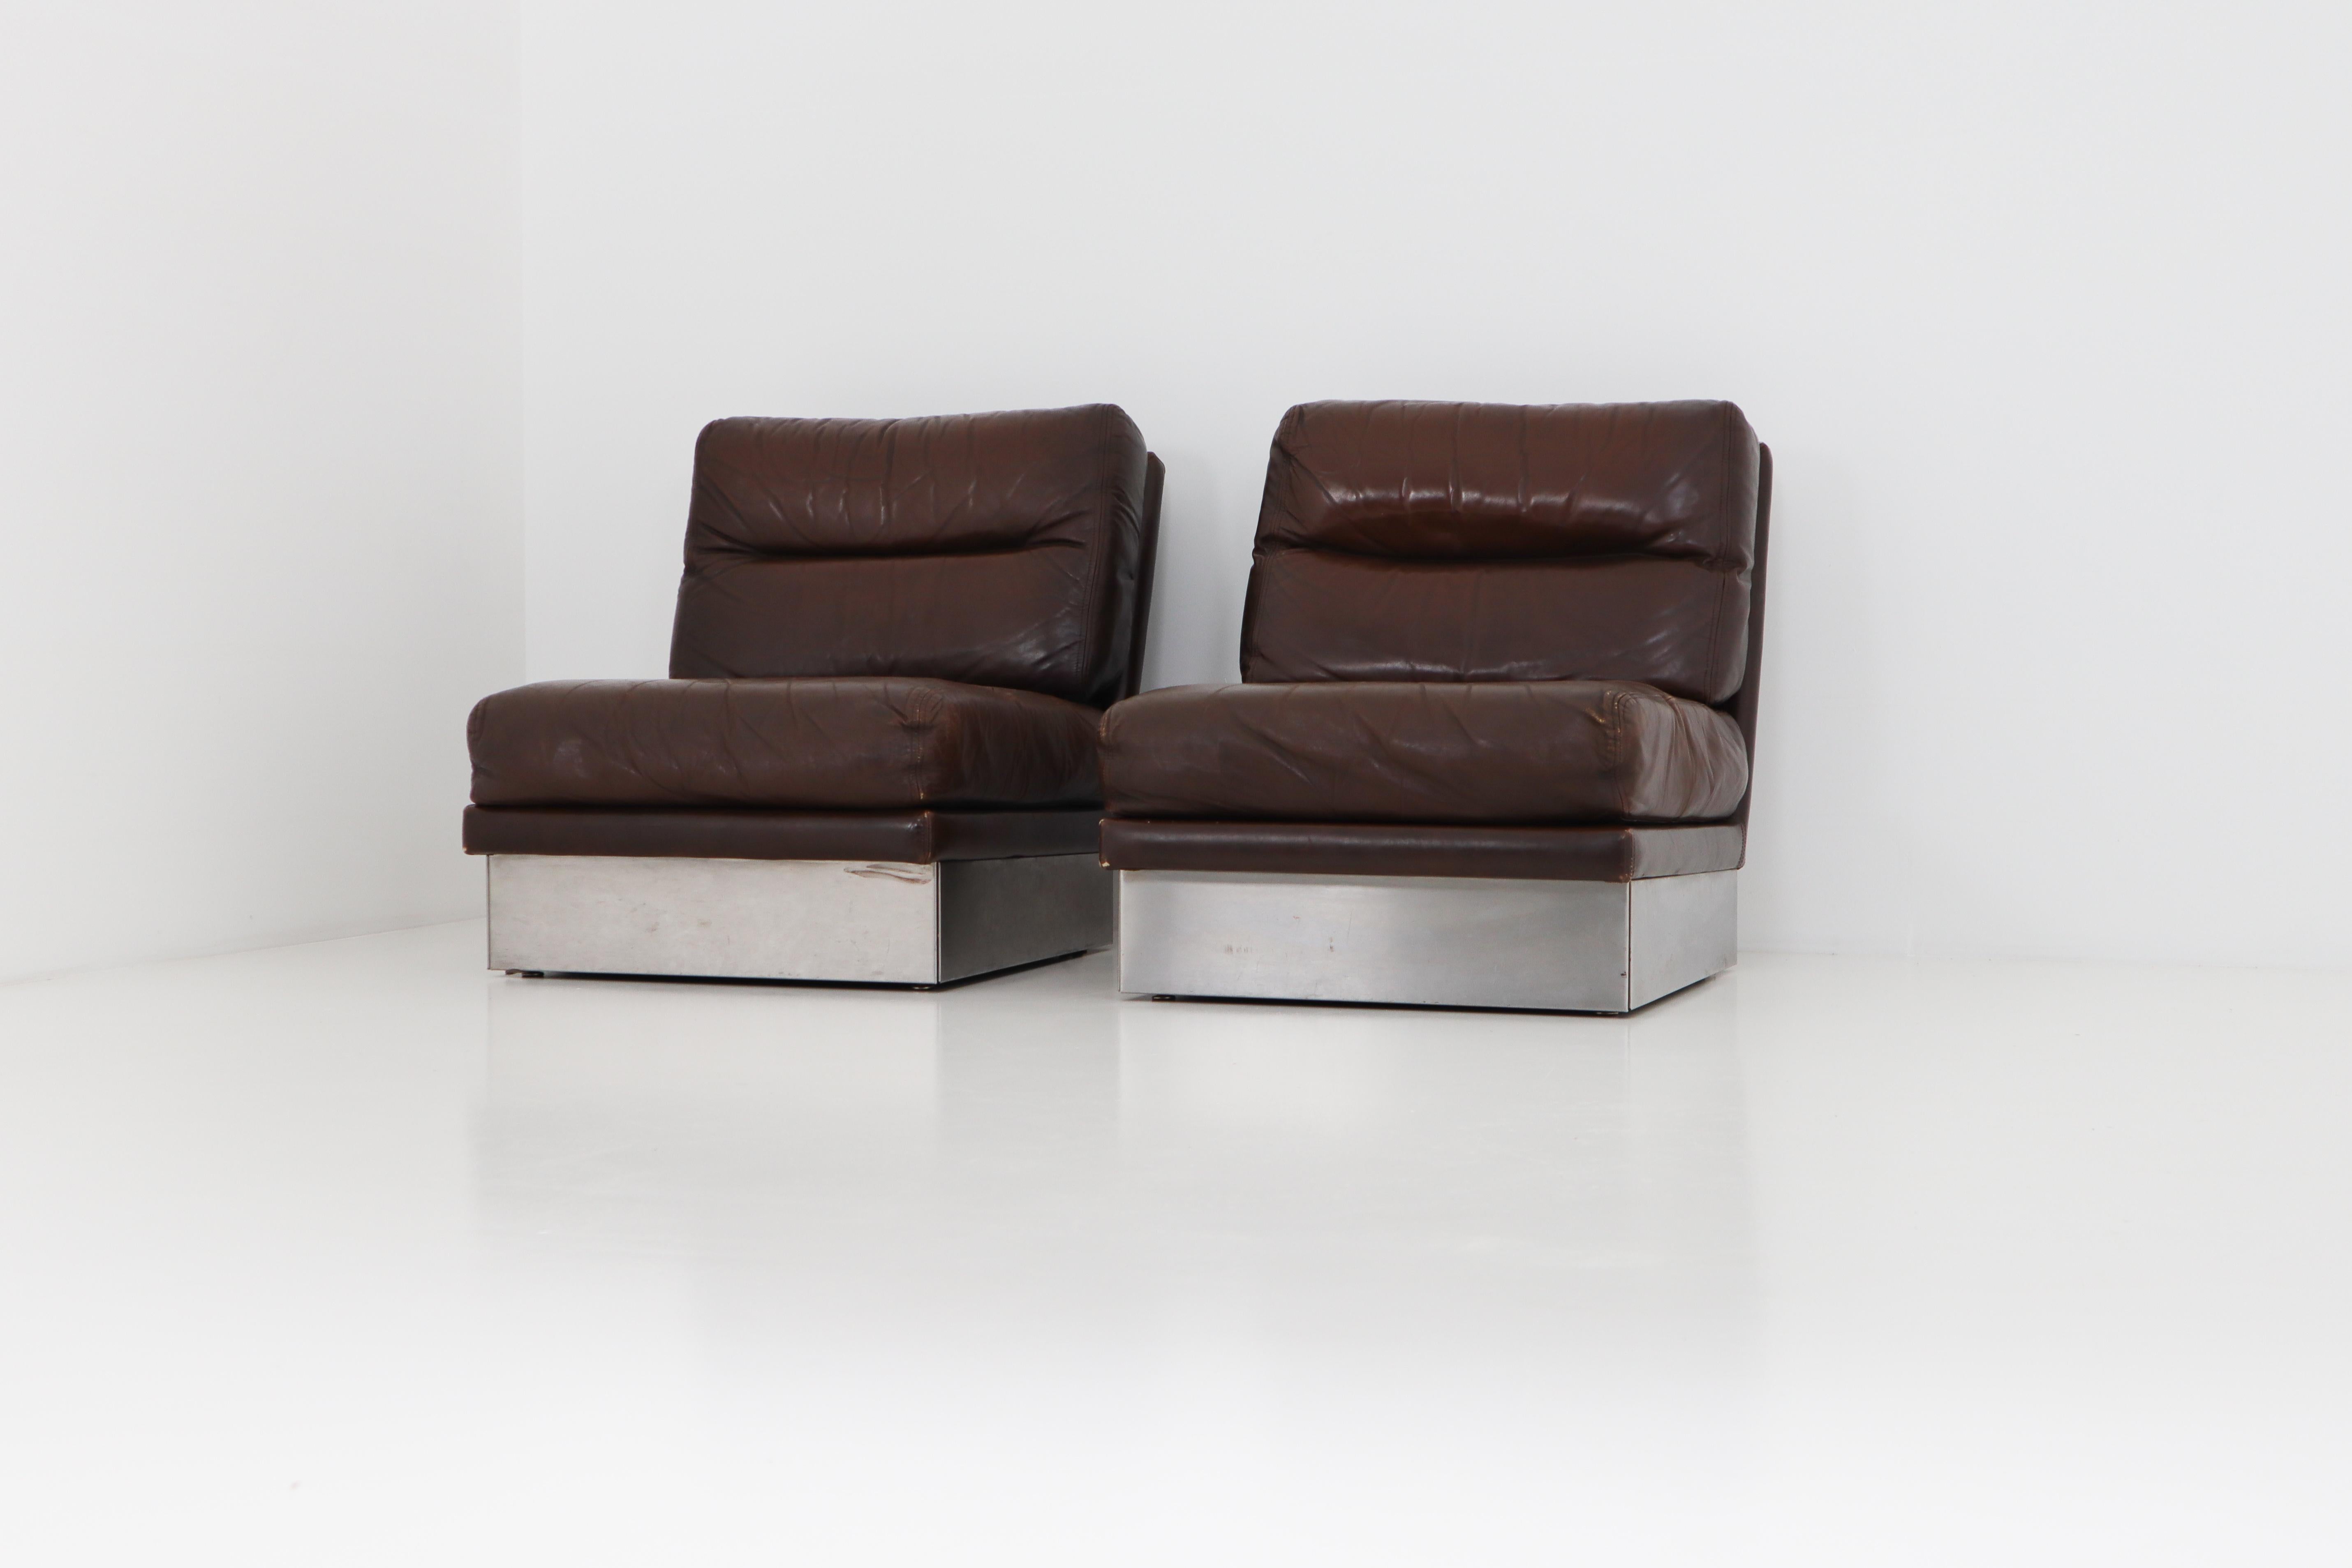 Jacques Charpentier Pair of Lounge Chairs, Brown Leather, Steel Base, 1970s 4